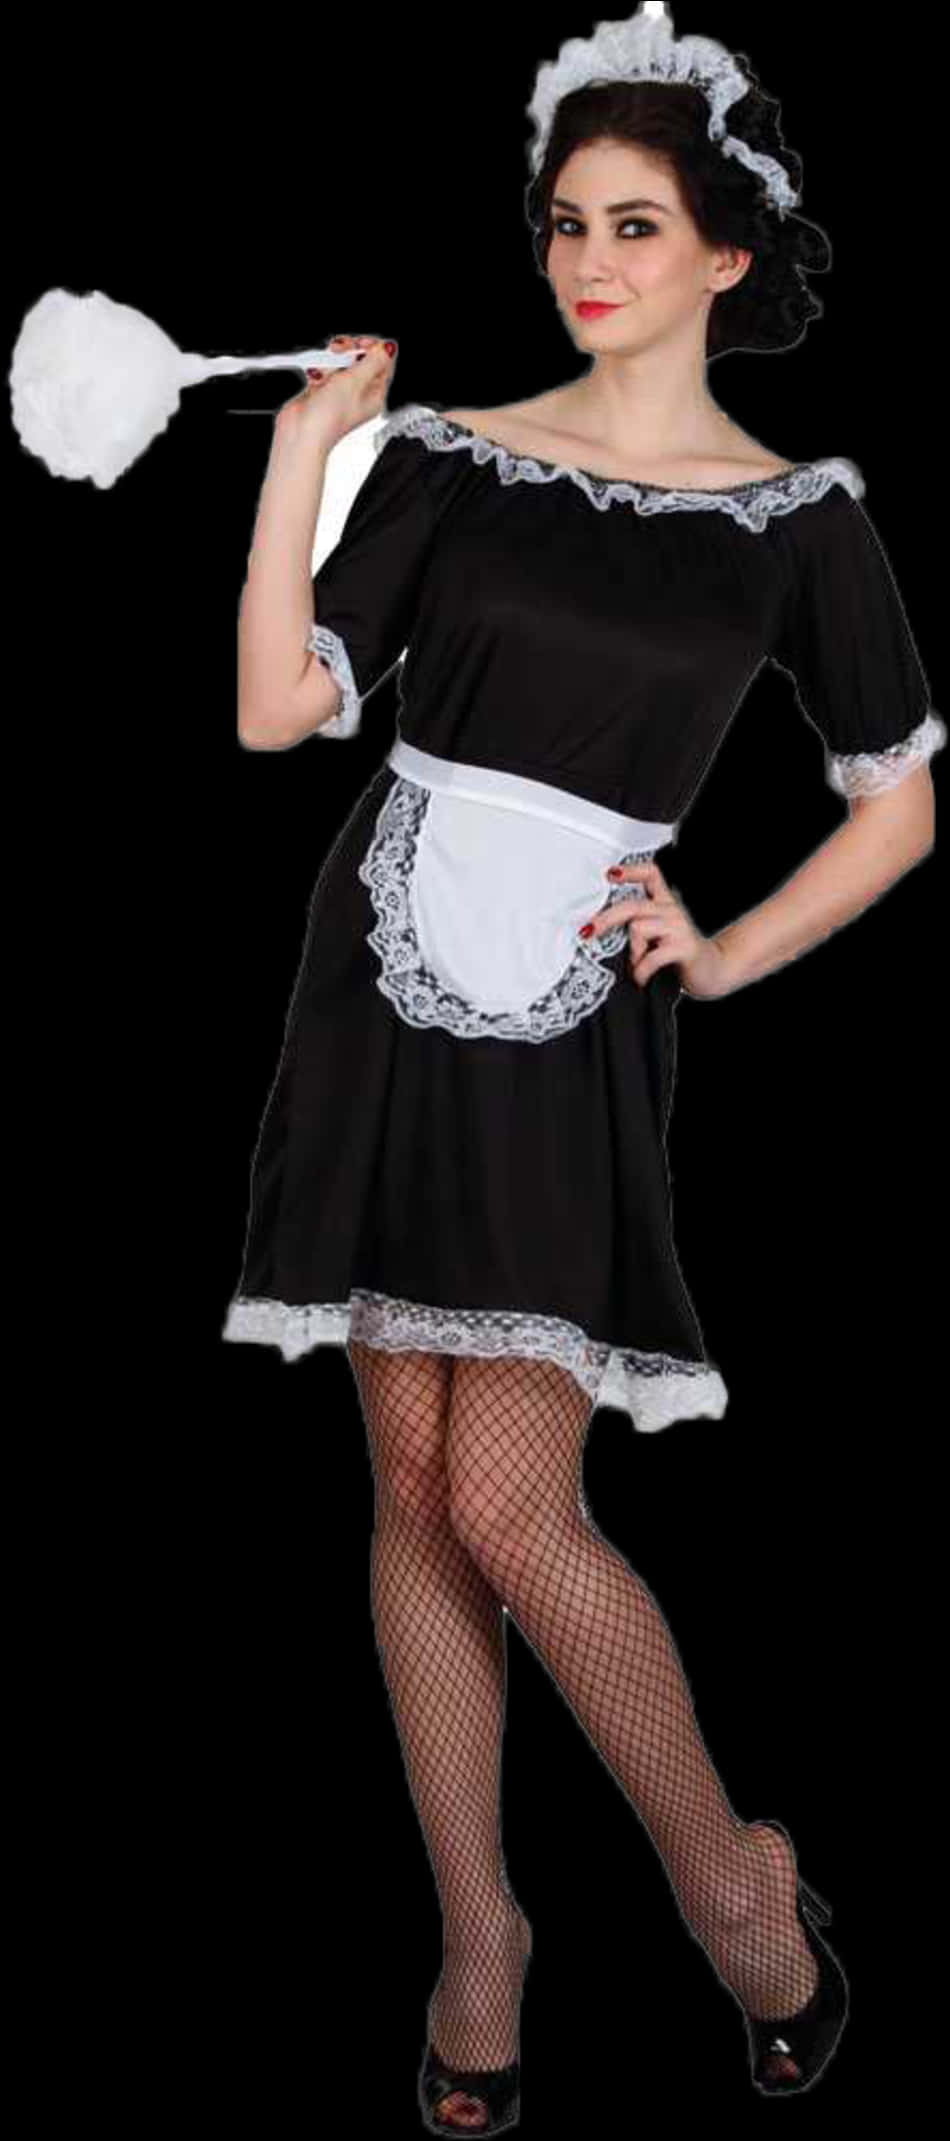 A Woman In A Maid Outfit